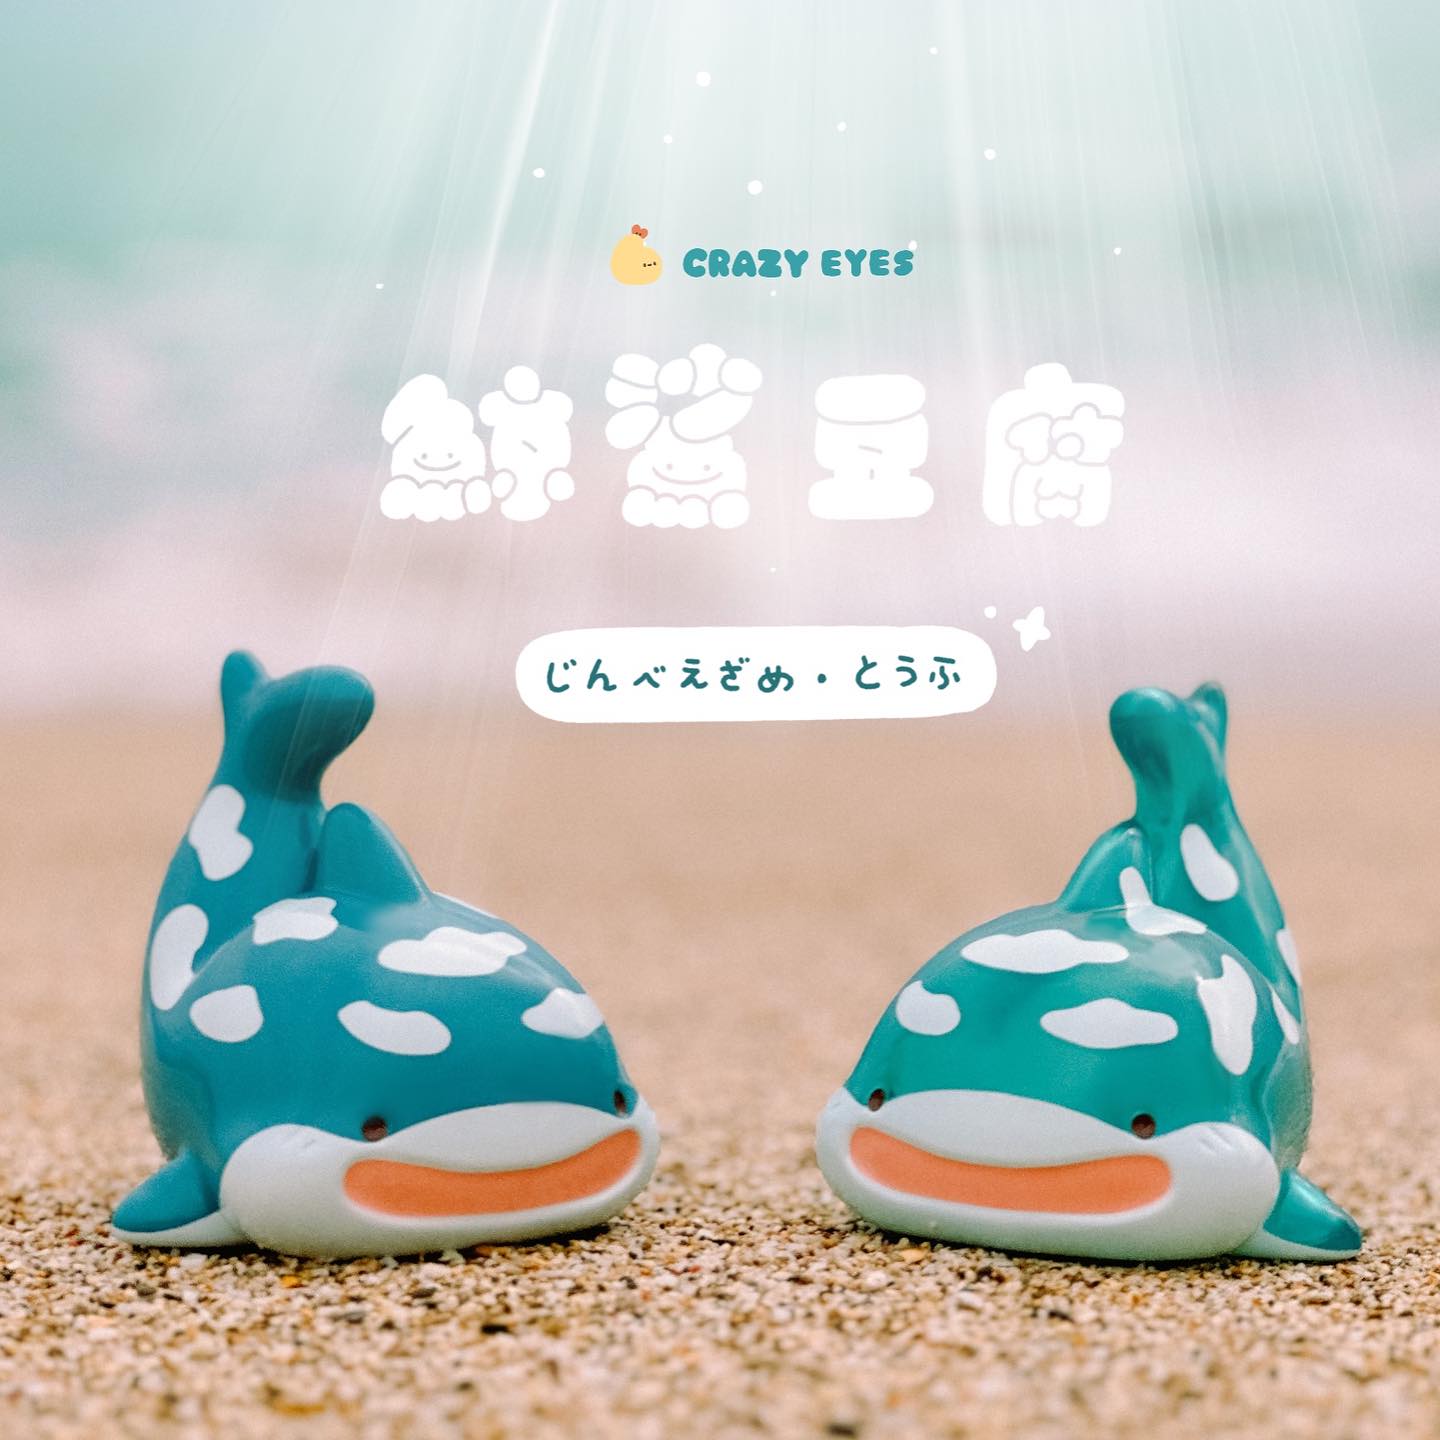 Whale Shark by Crazy Eyes - Preorder, two toy whales on sand, cartoon, ground.